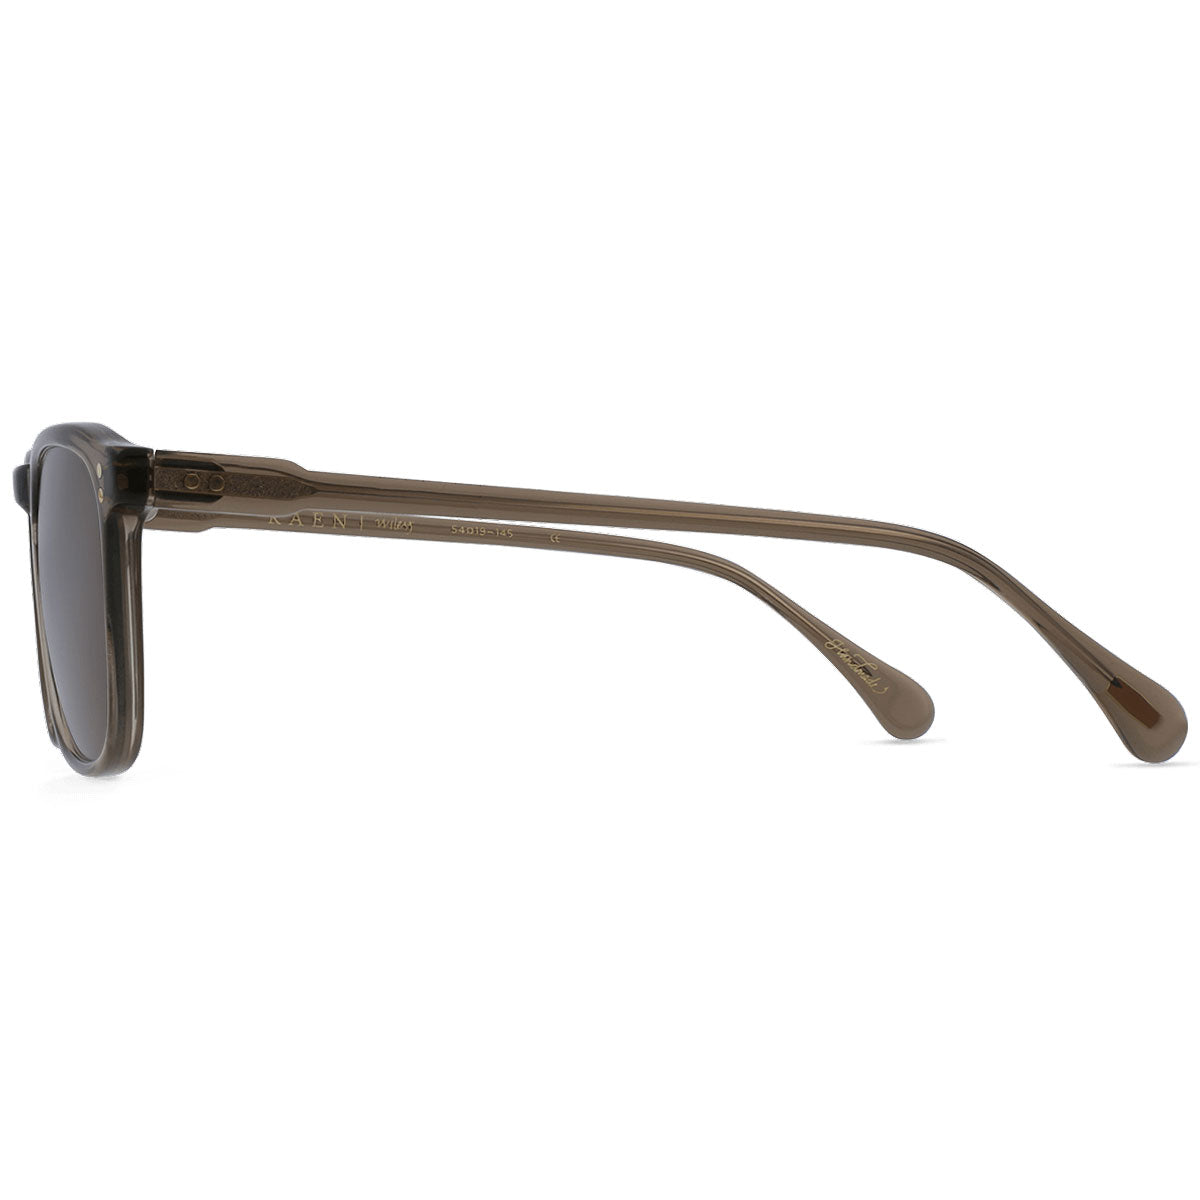 Raen Wiley Sunglasses - Ghost/Vibrant Brown Polarized image 2